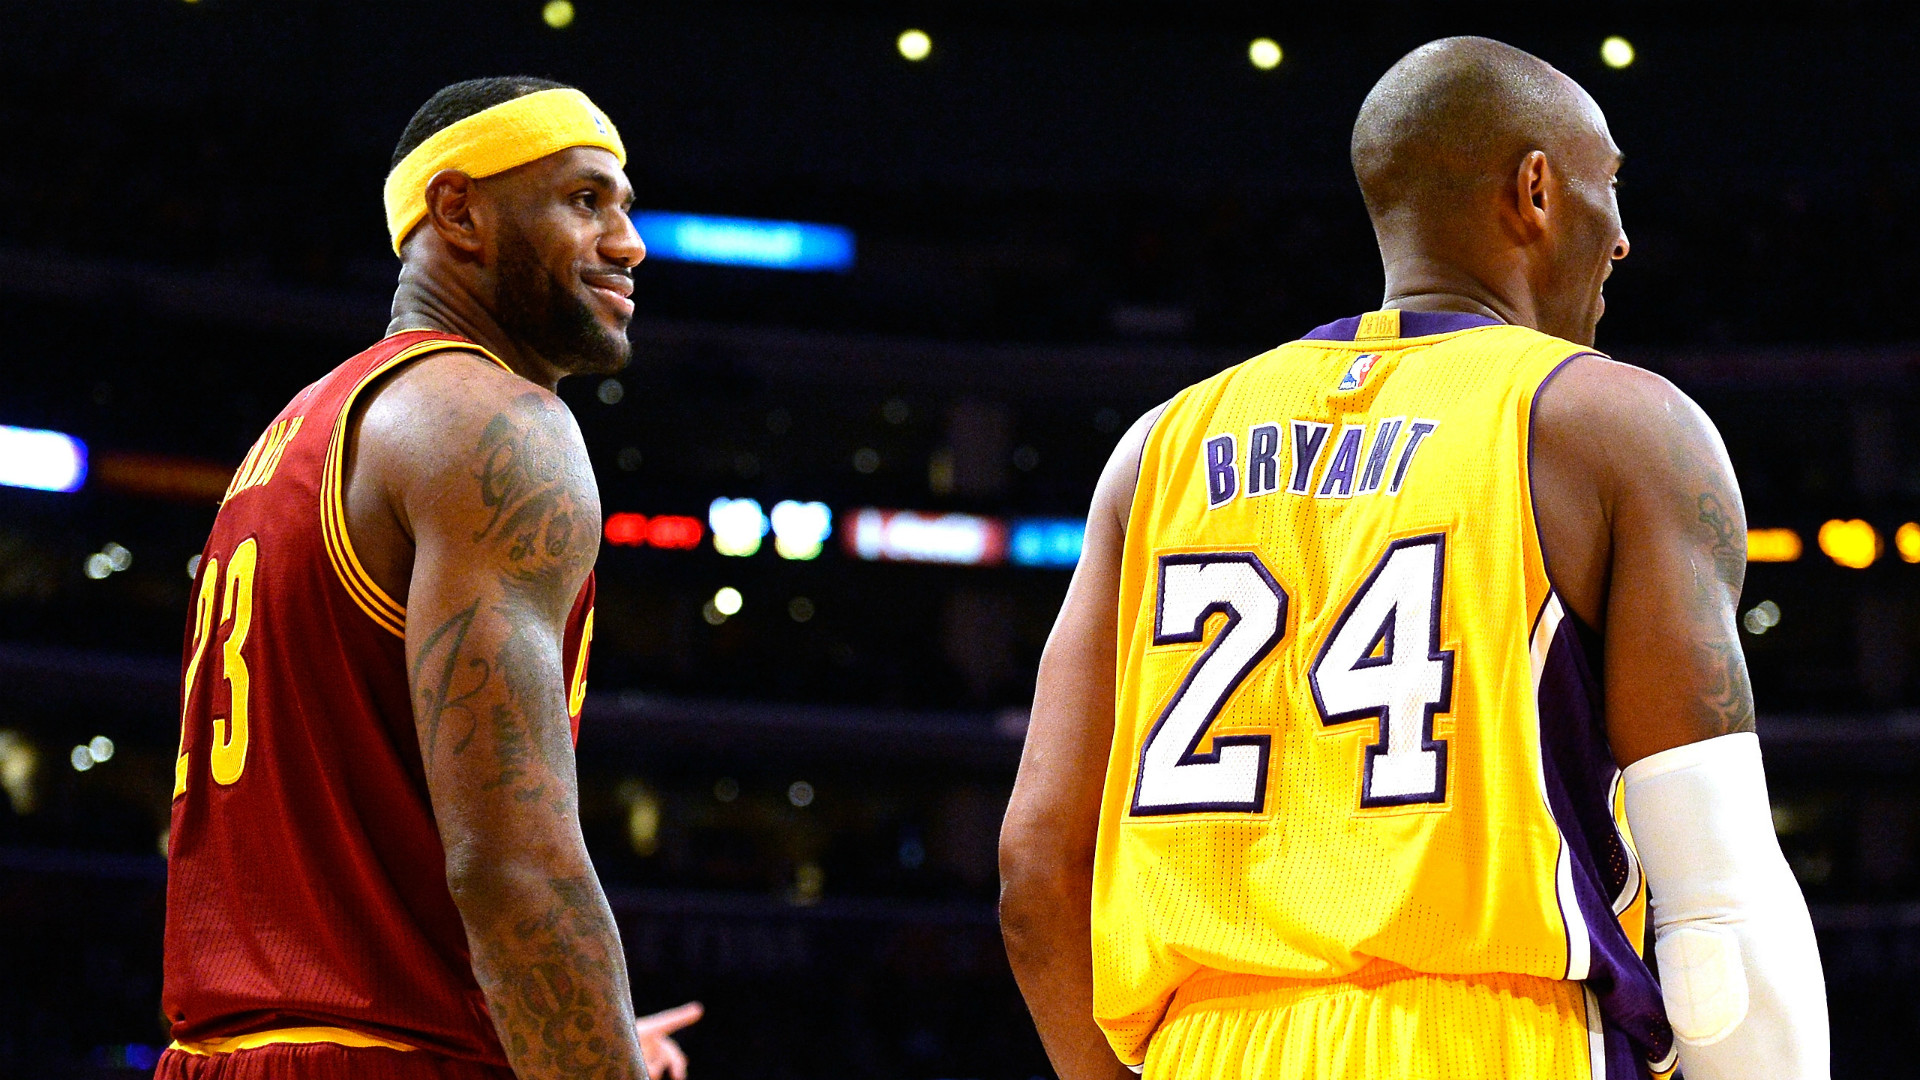 1920x1080 No, Kobe Bryant isn't coming out of retirement to play with LeBron James